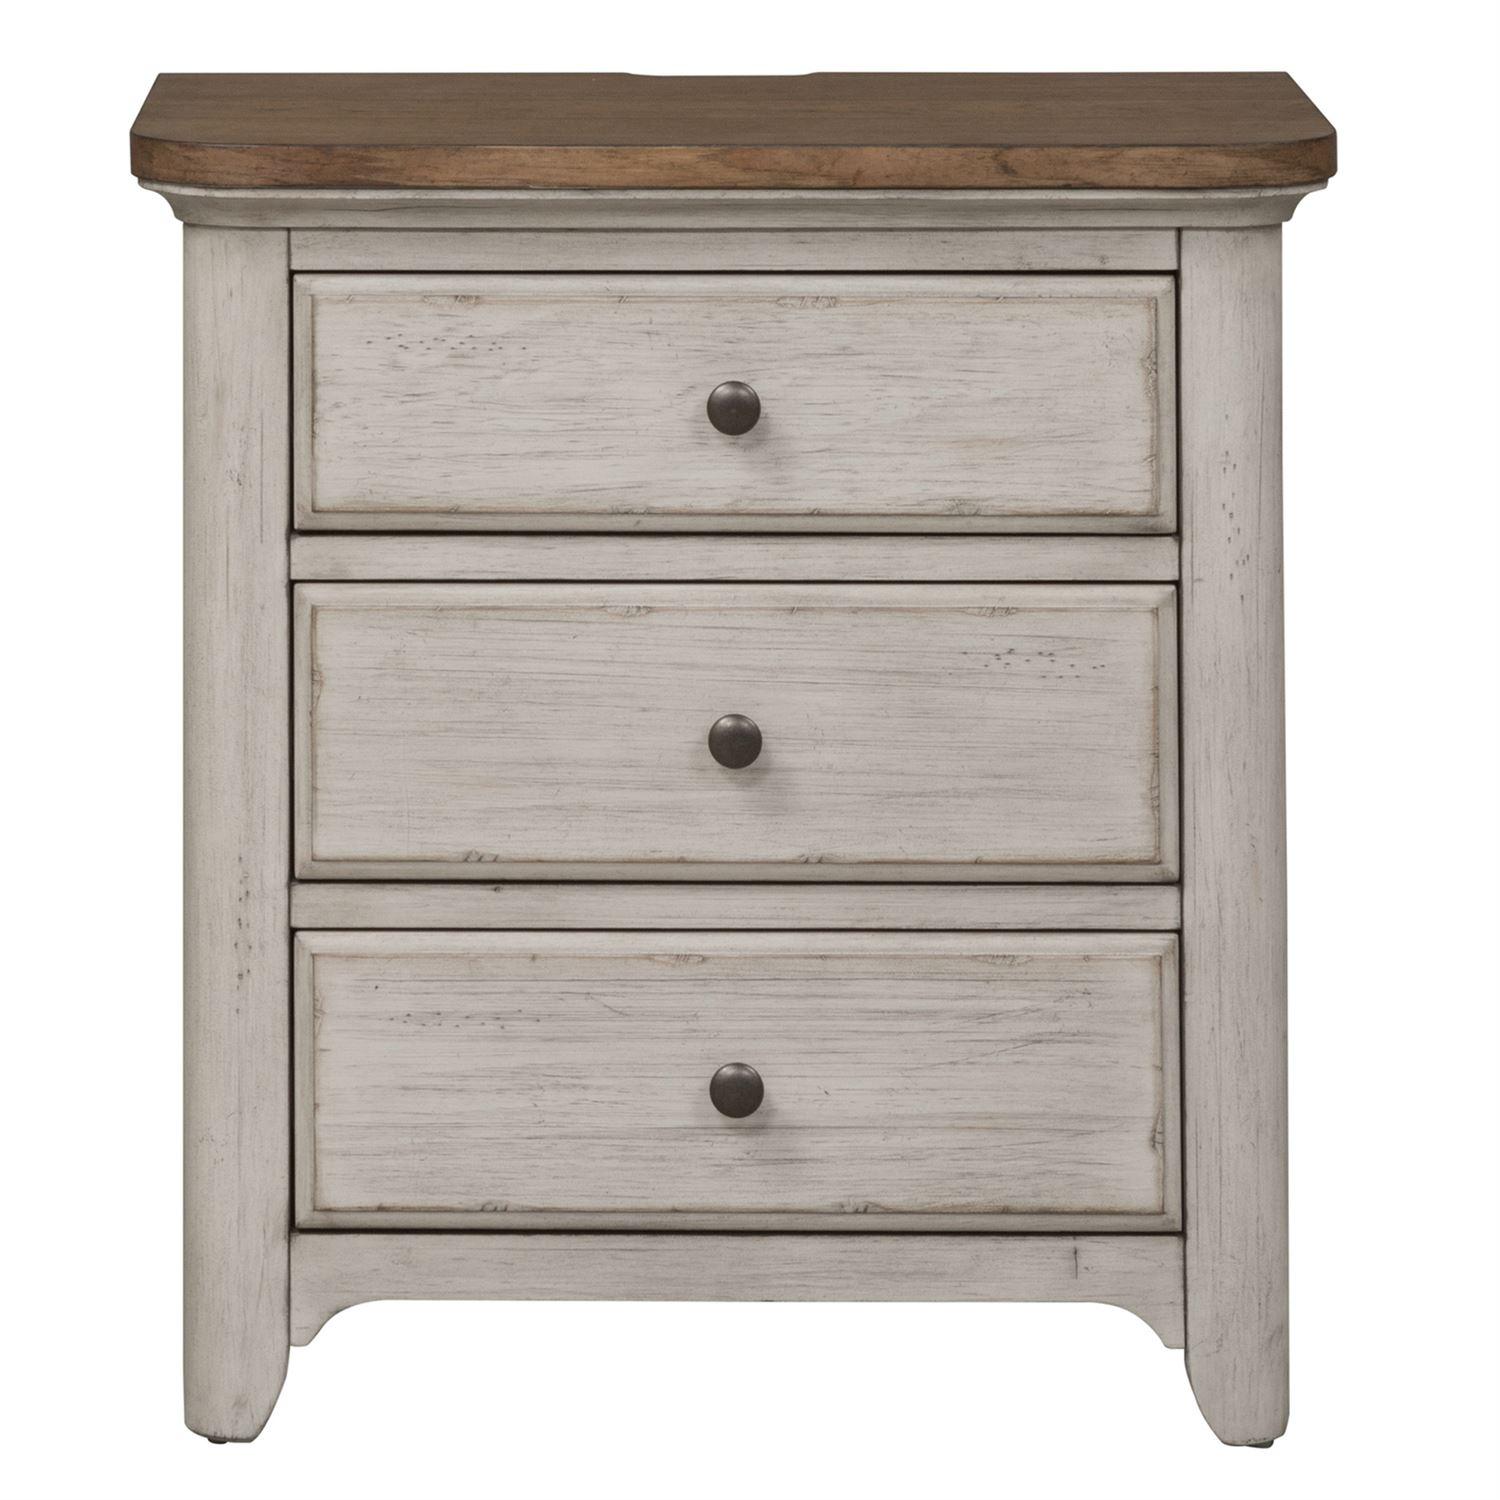 Farmhouse Nightstand Farmhouse Reimagined  (652-BR) Nightstand 652-BR61 in White 